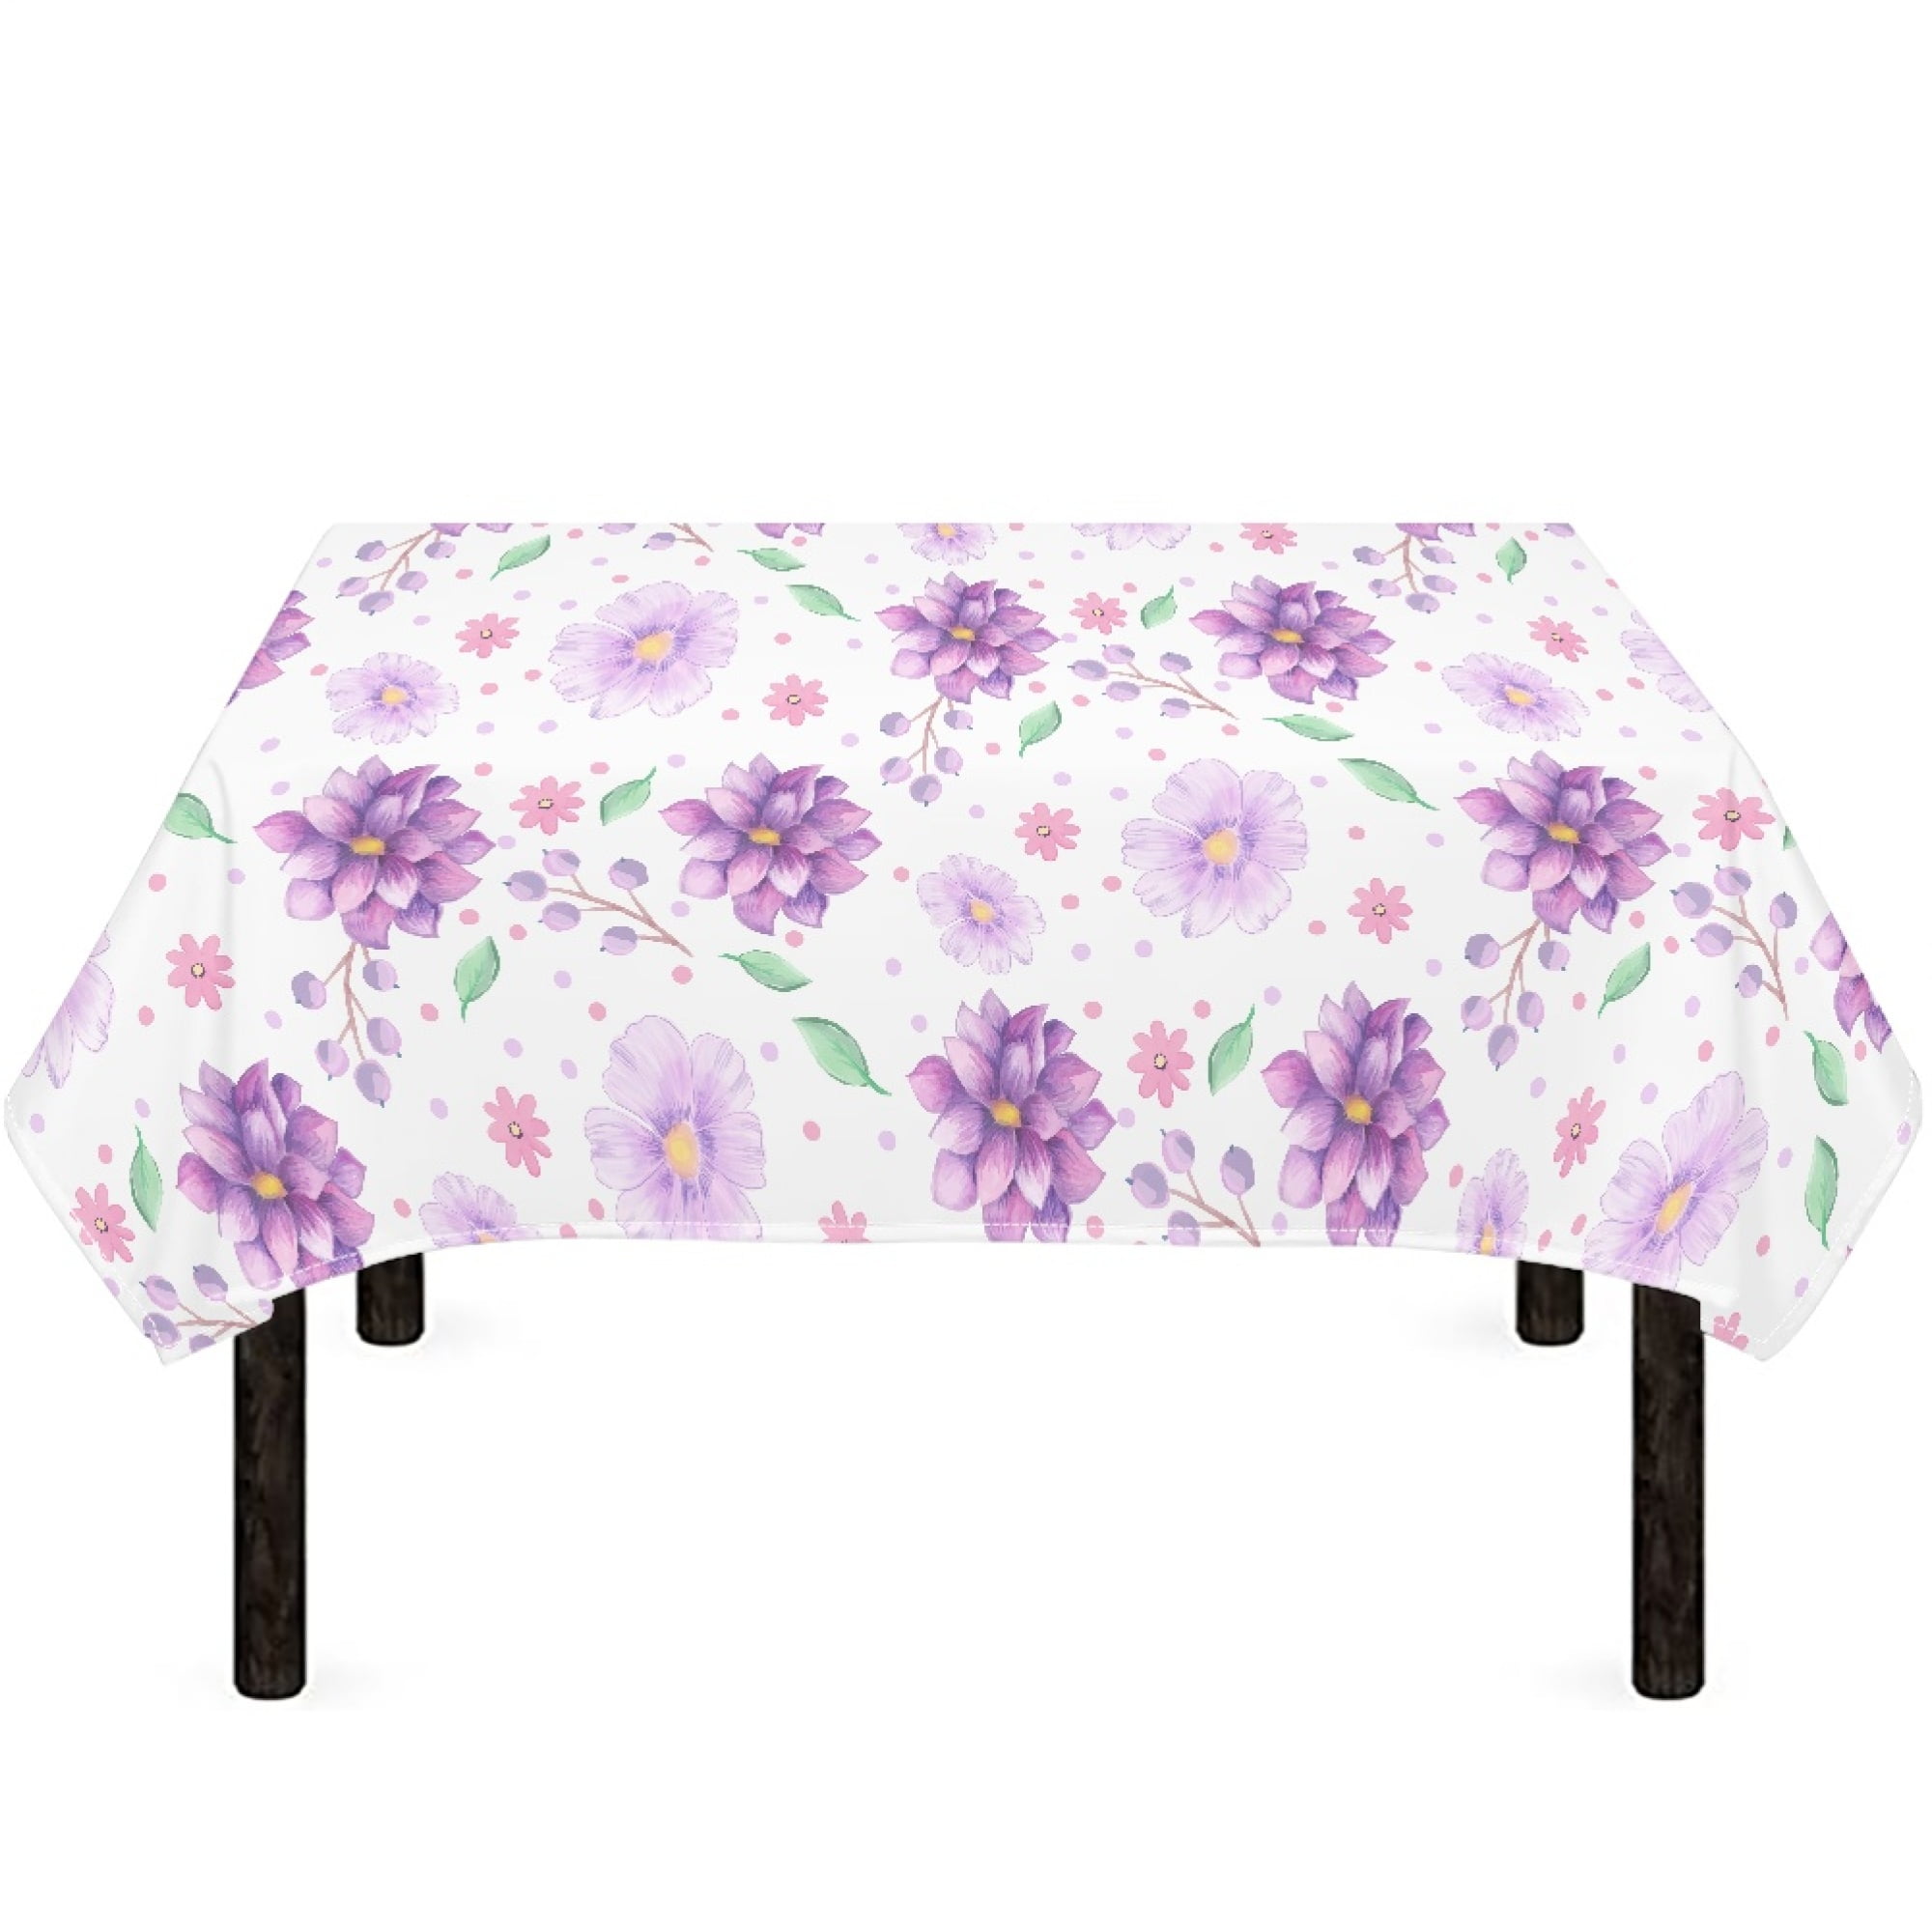 Bivenant Store Floral Square Tablecloth 52x52 Inch-Waterproof & Wrinkle ...